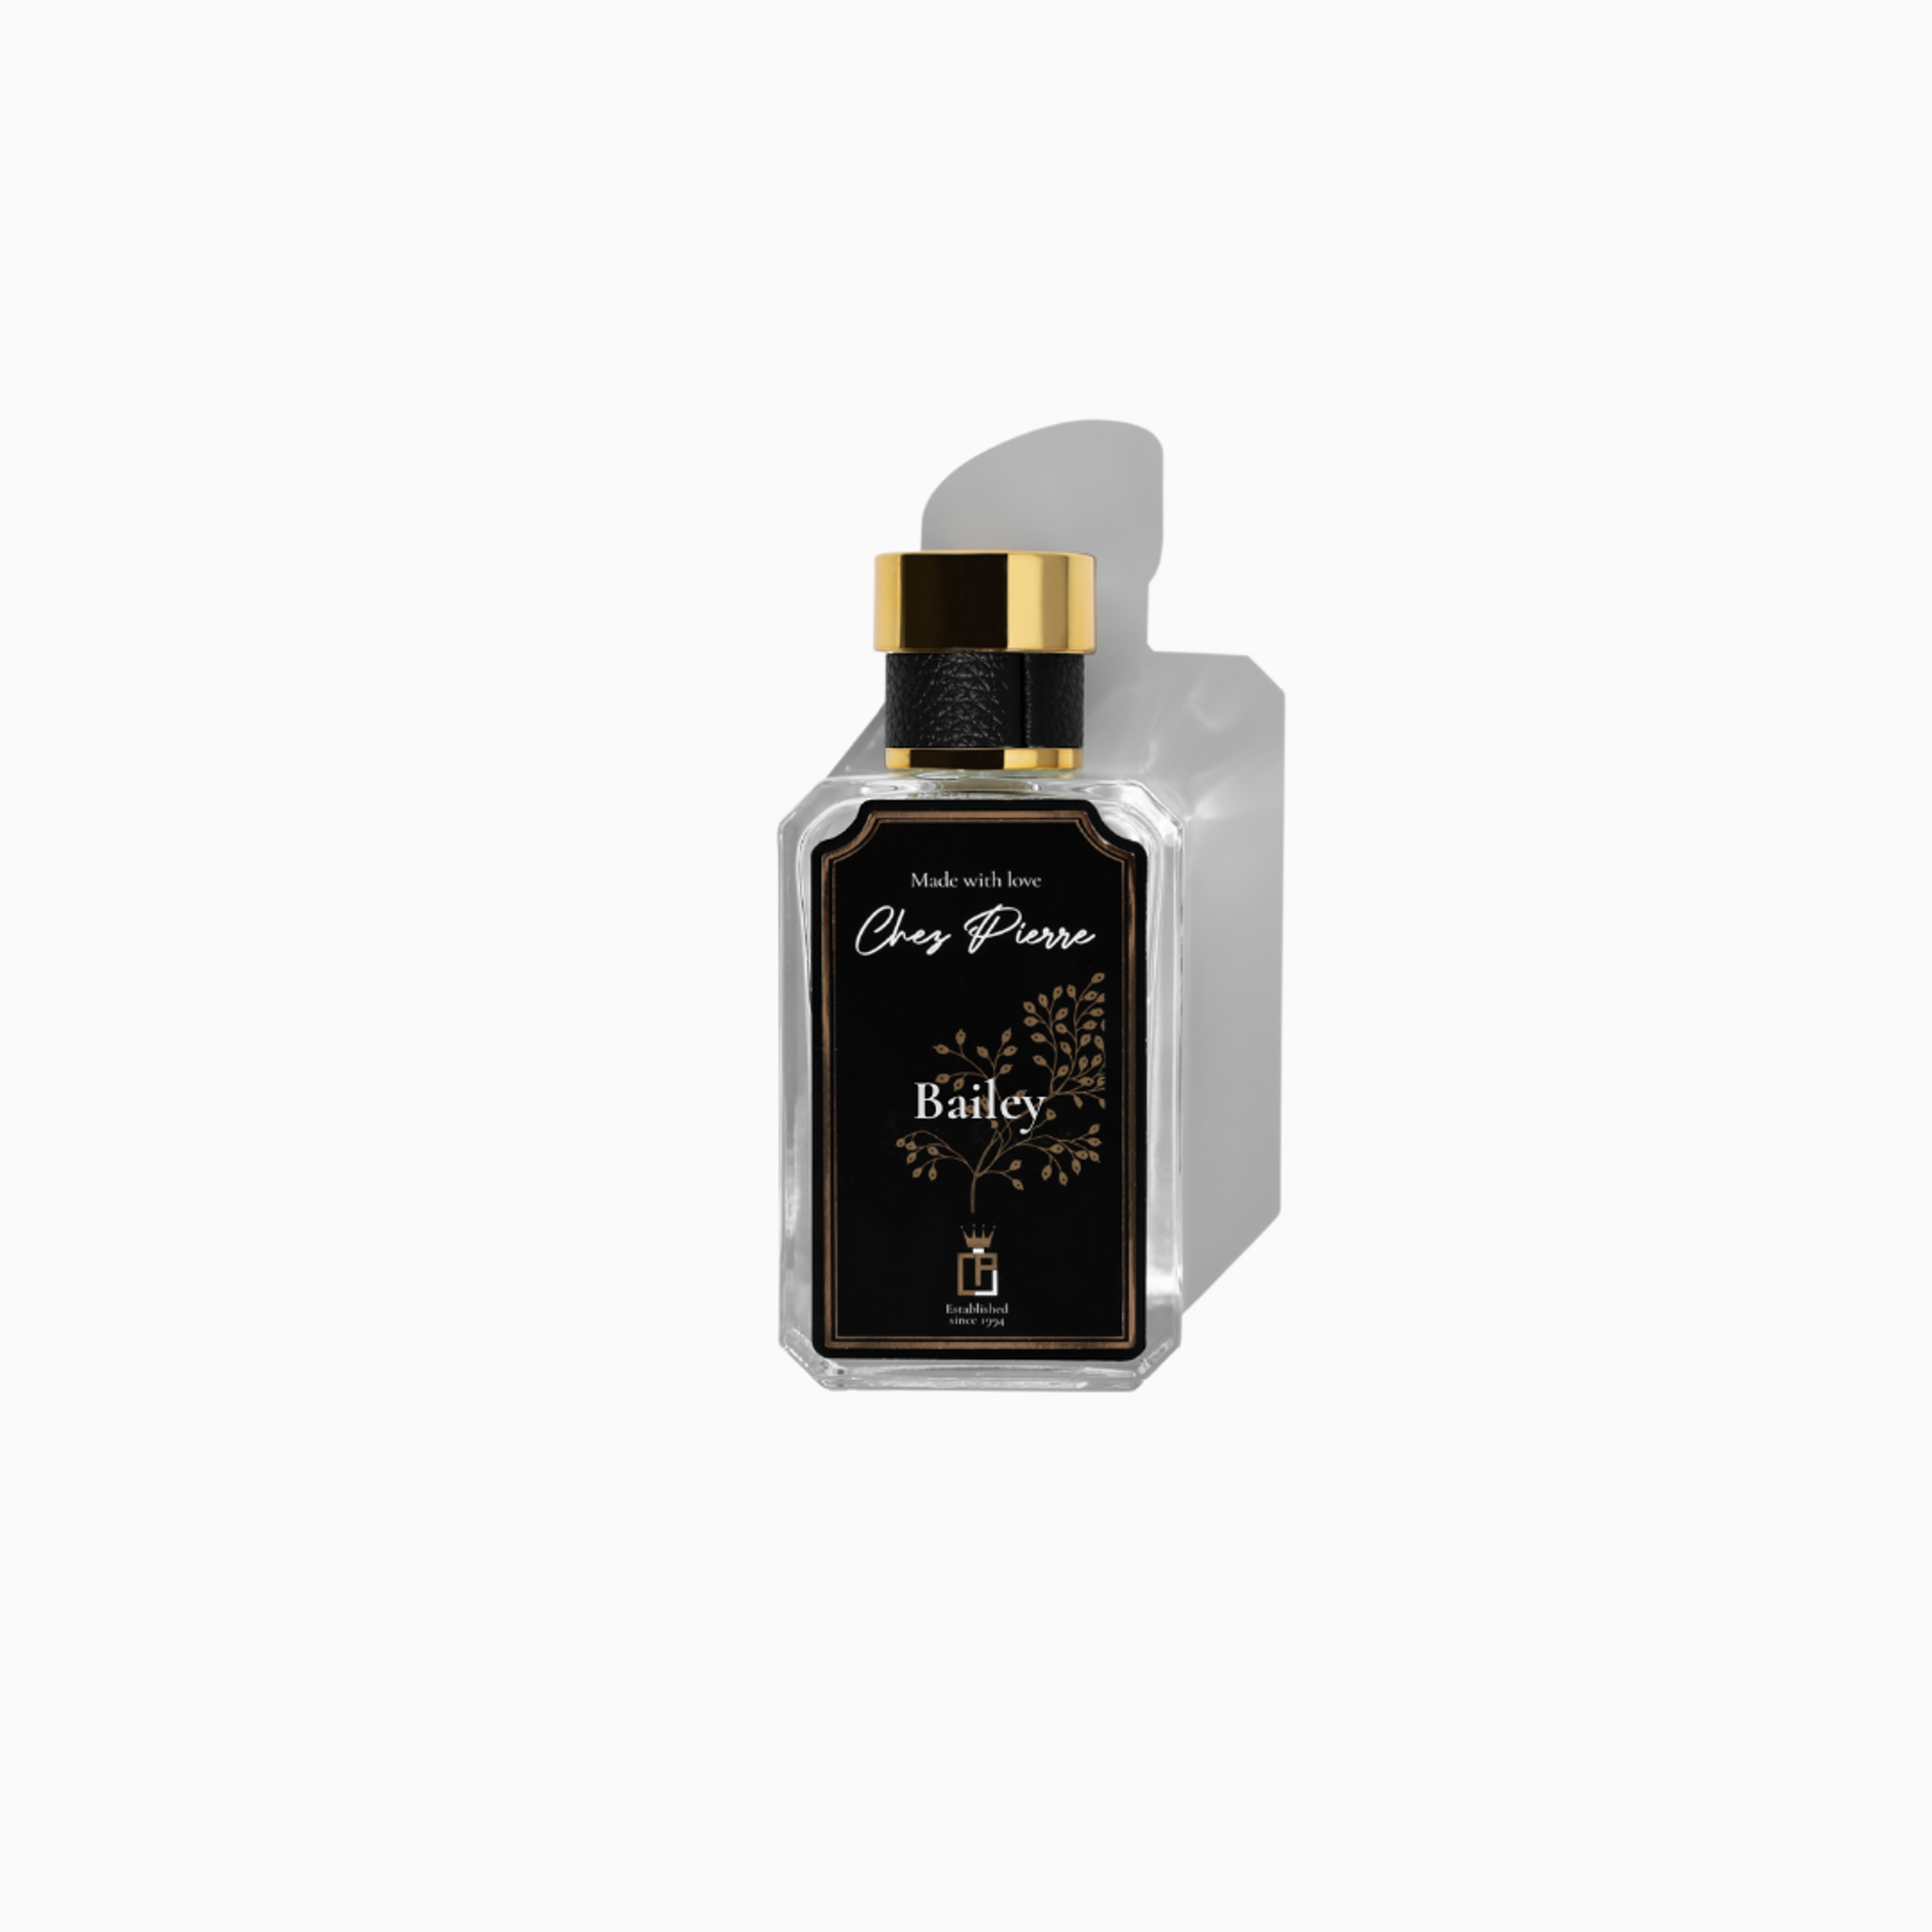 Chez Pierre's Bailey Perfume Inspired By Byredo Mojave Ghost